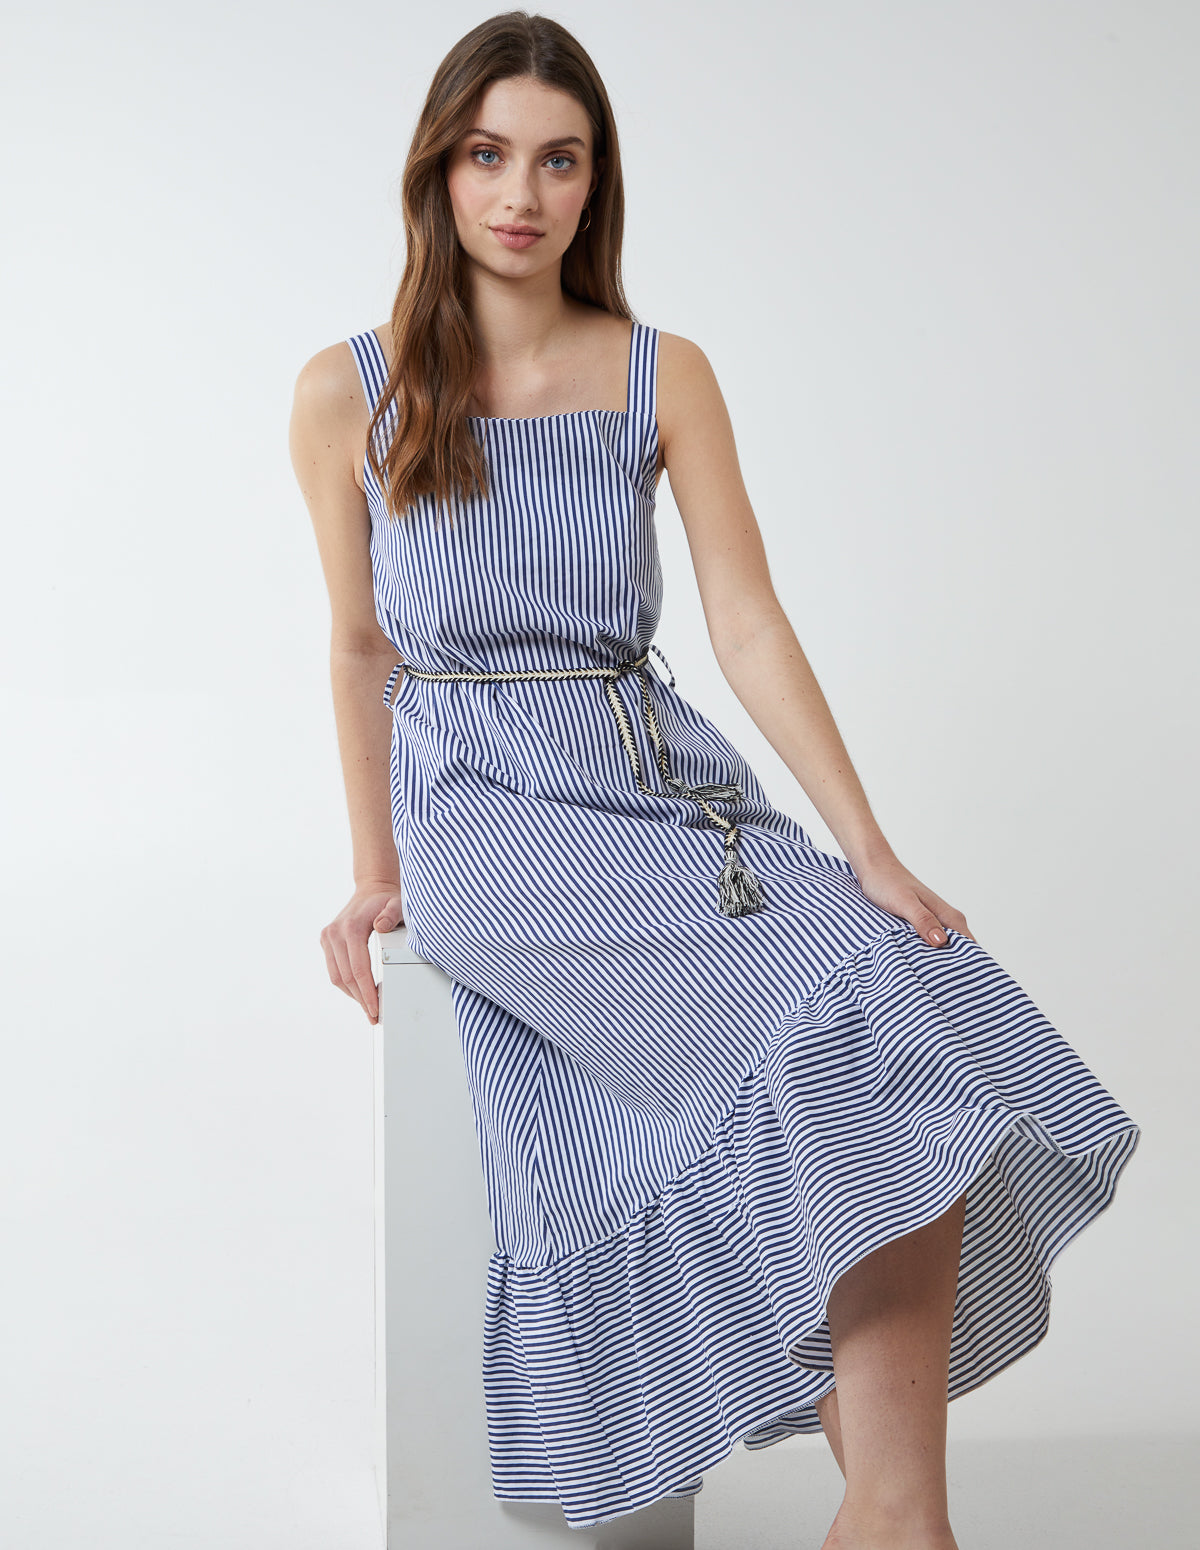 ISOBEL - Striped High Low Tiered Dress 